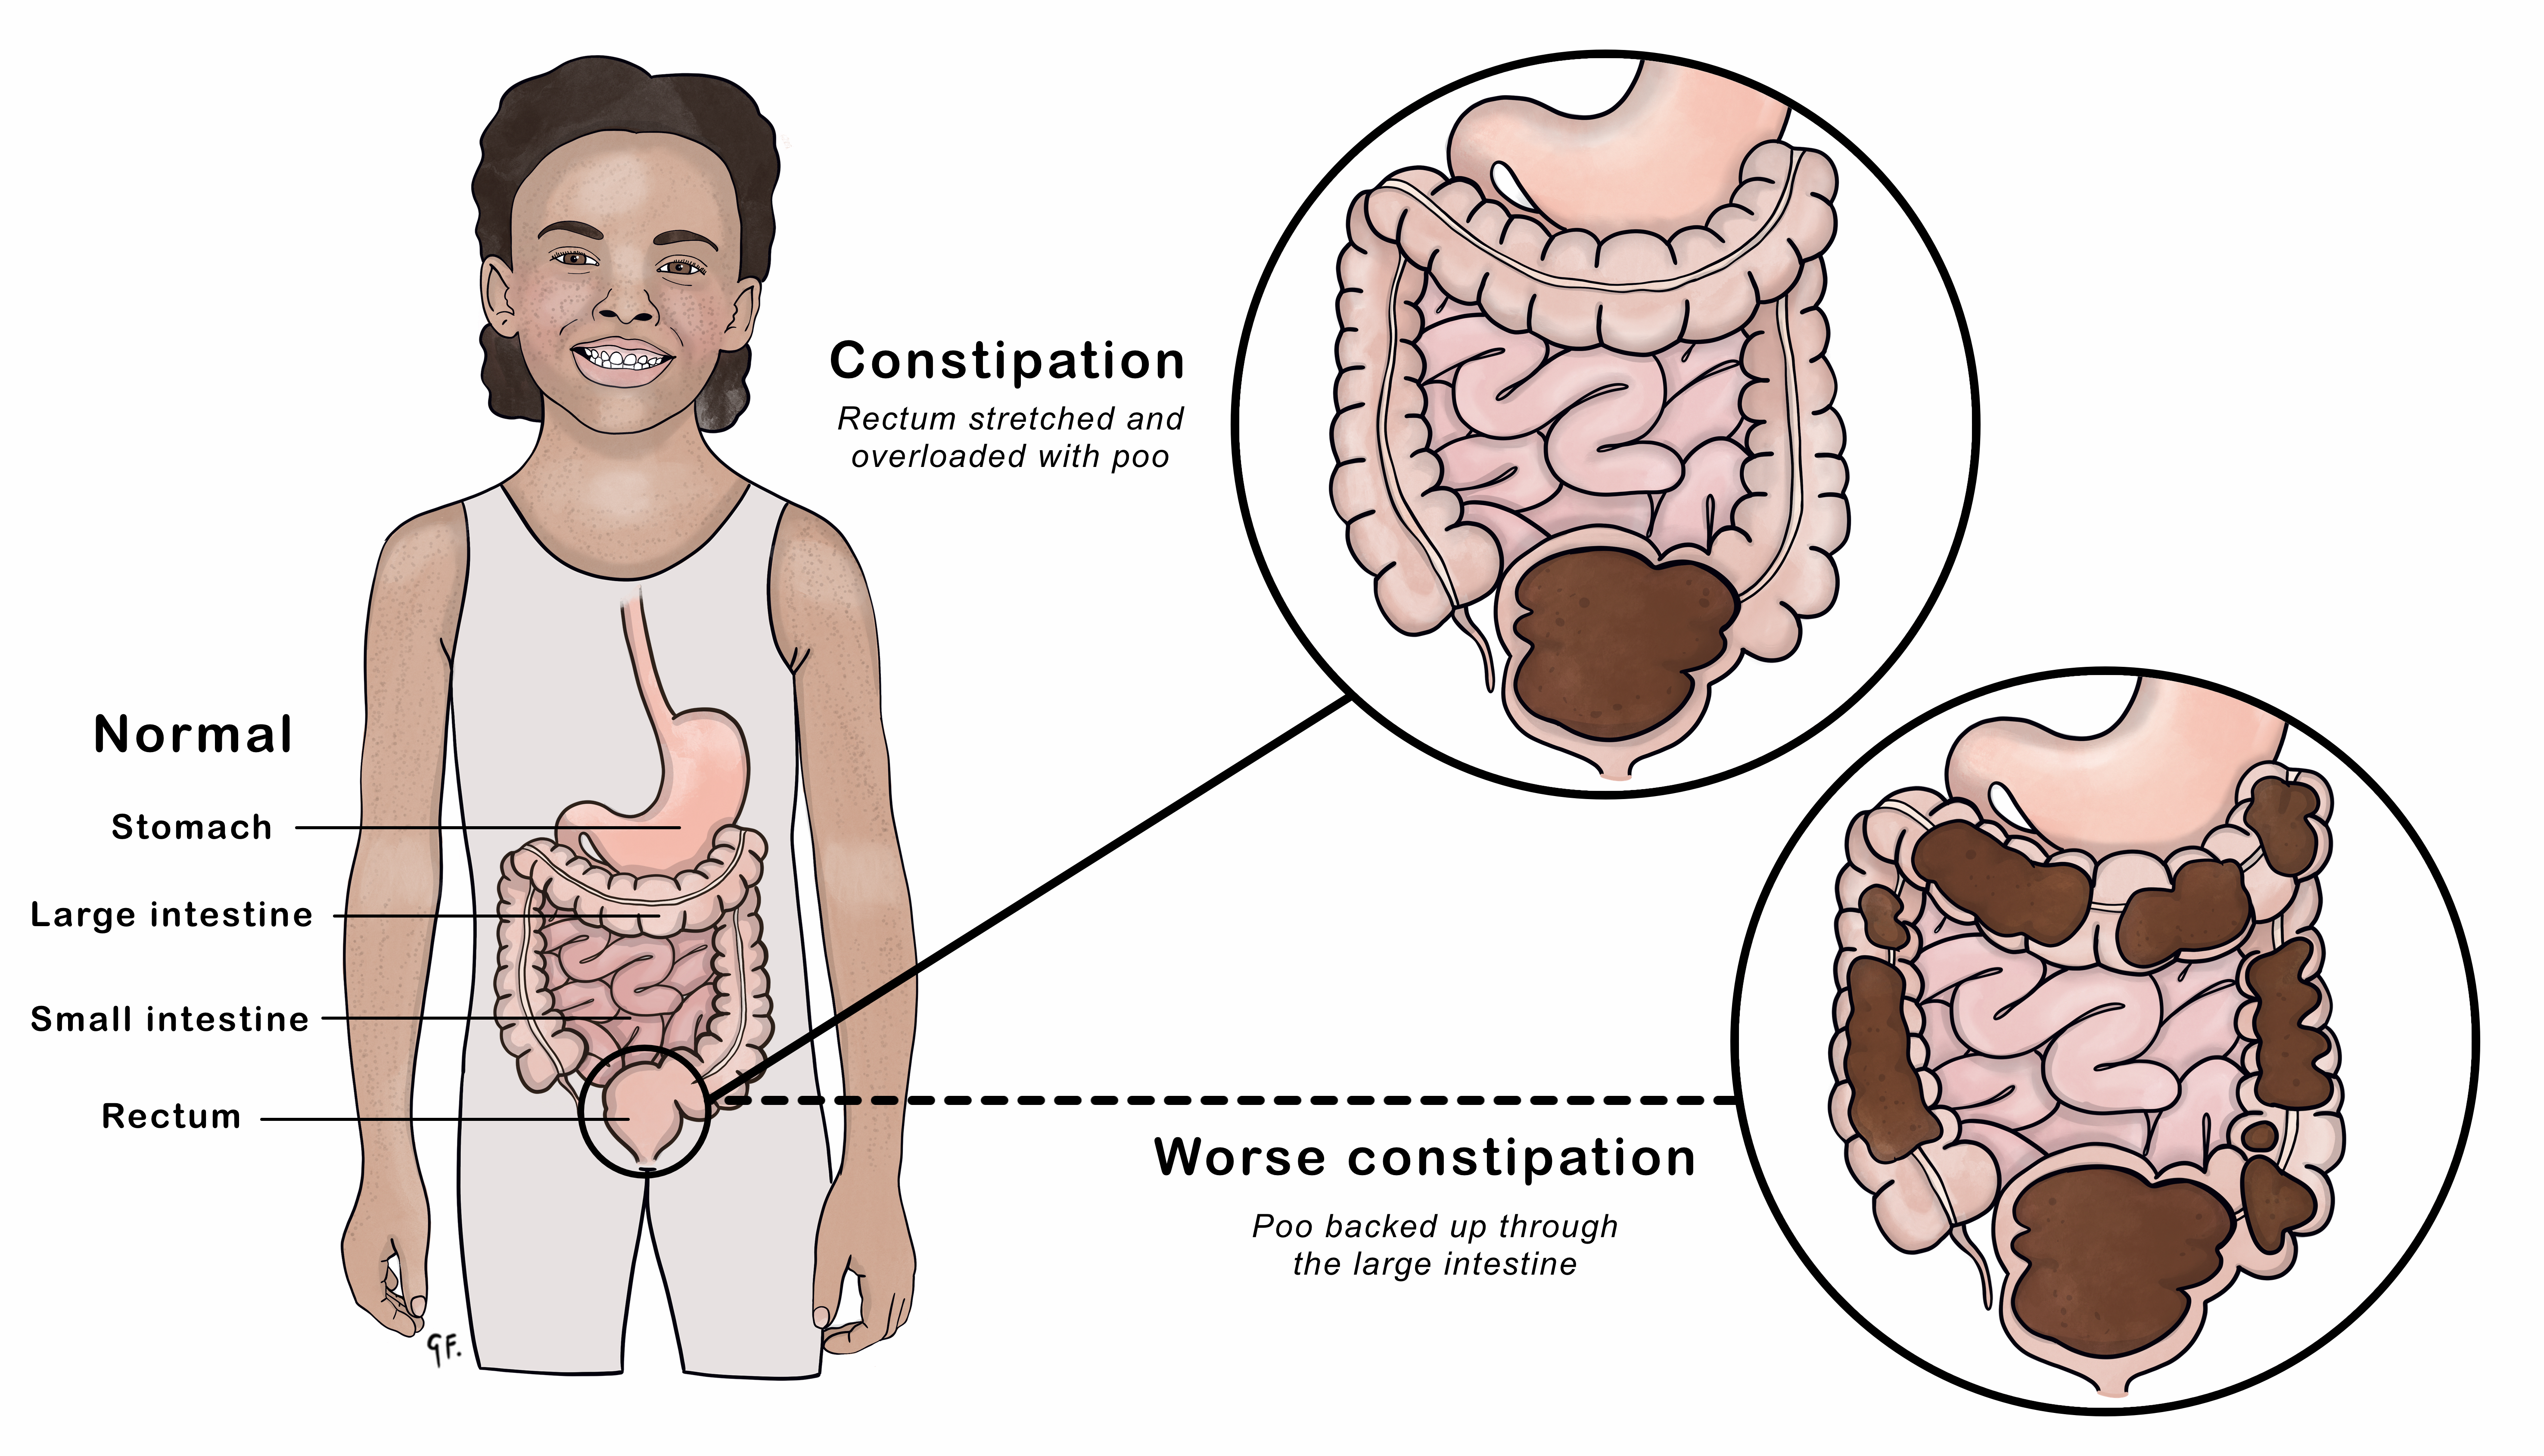 Continence In Kids, Constipation, What's 'Normal